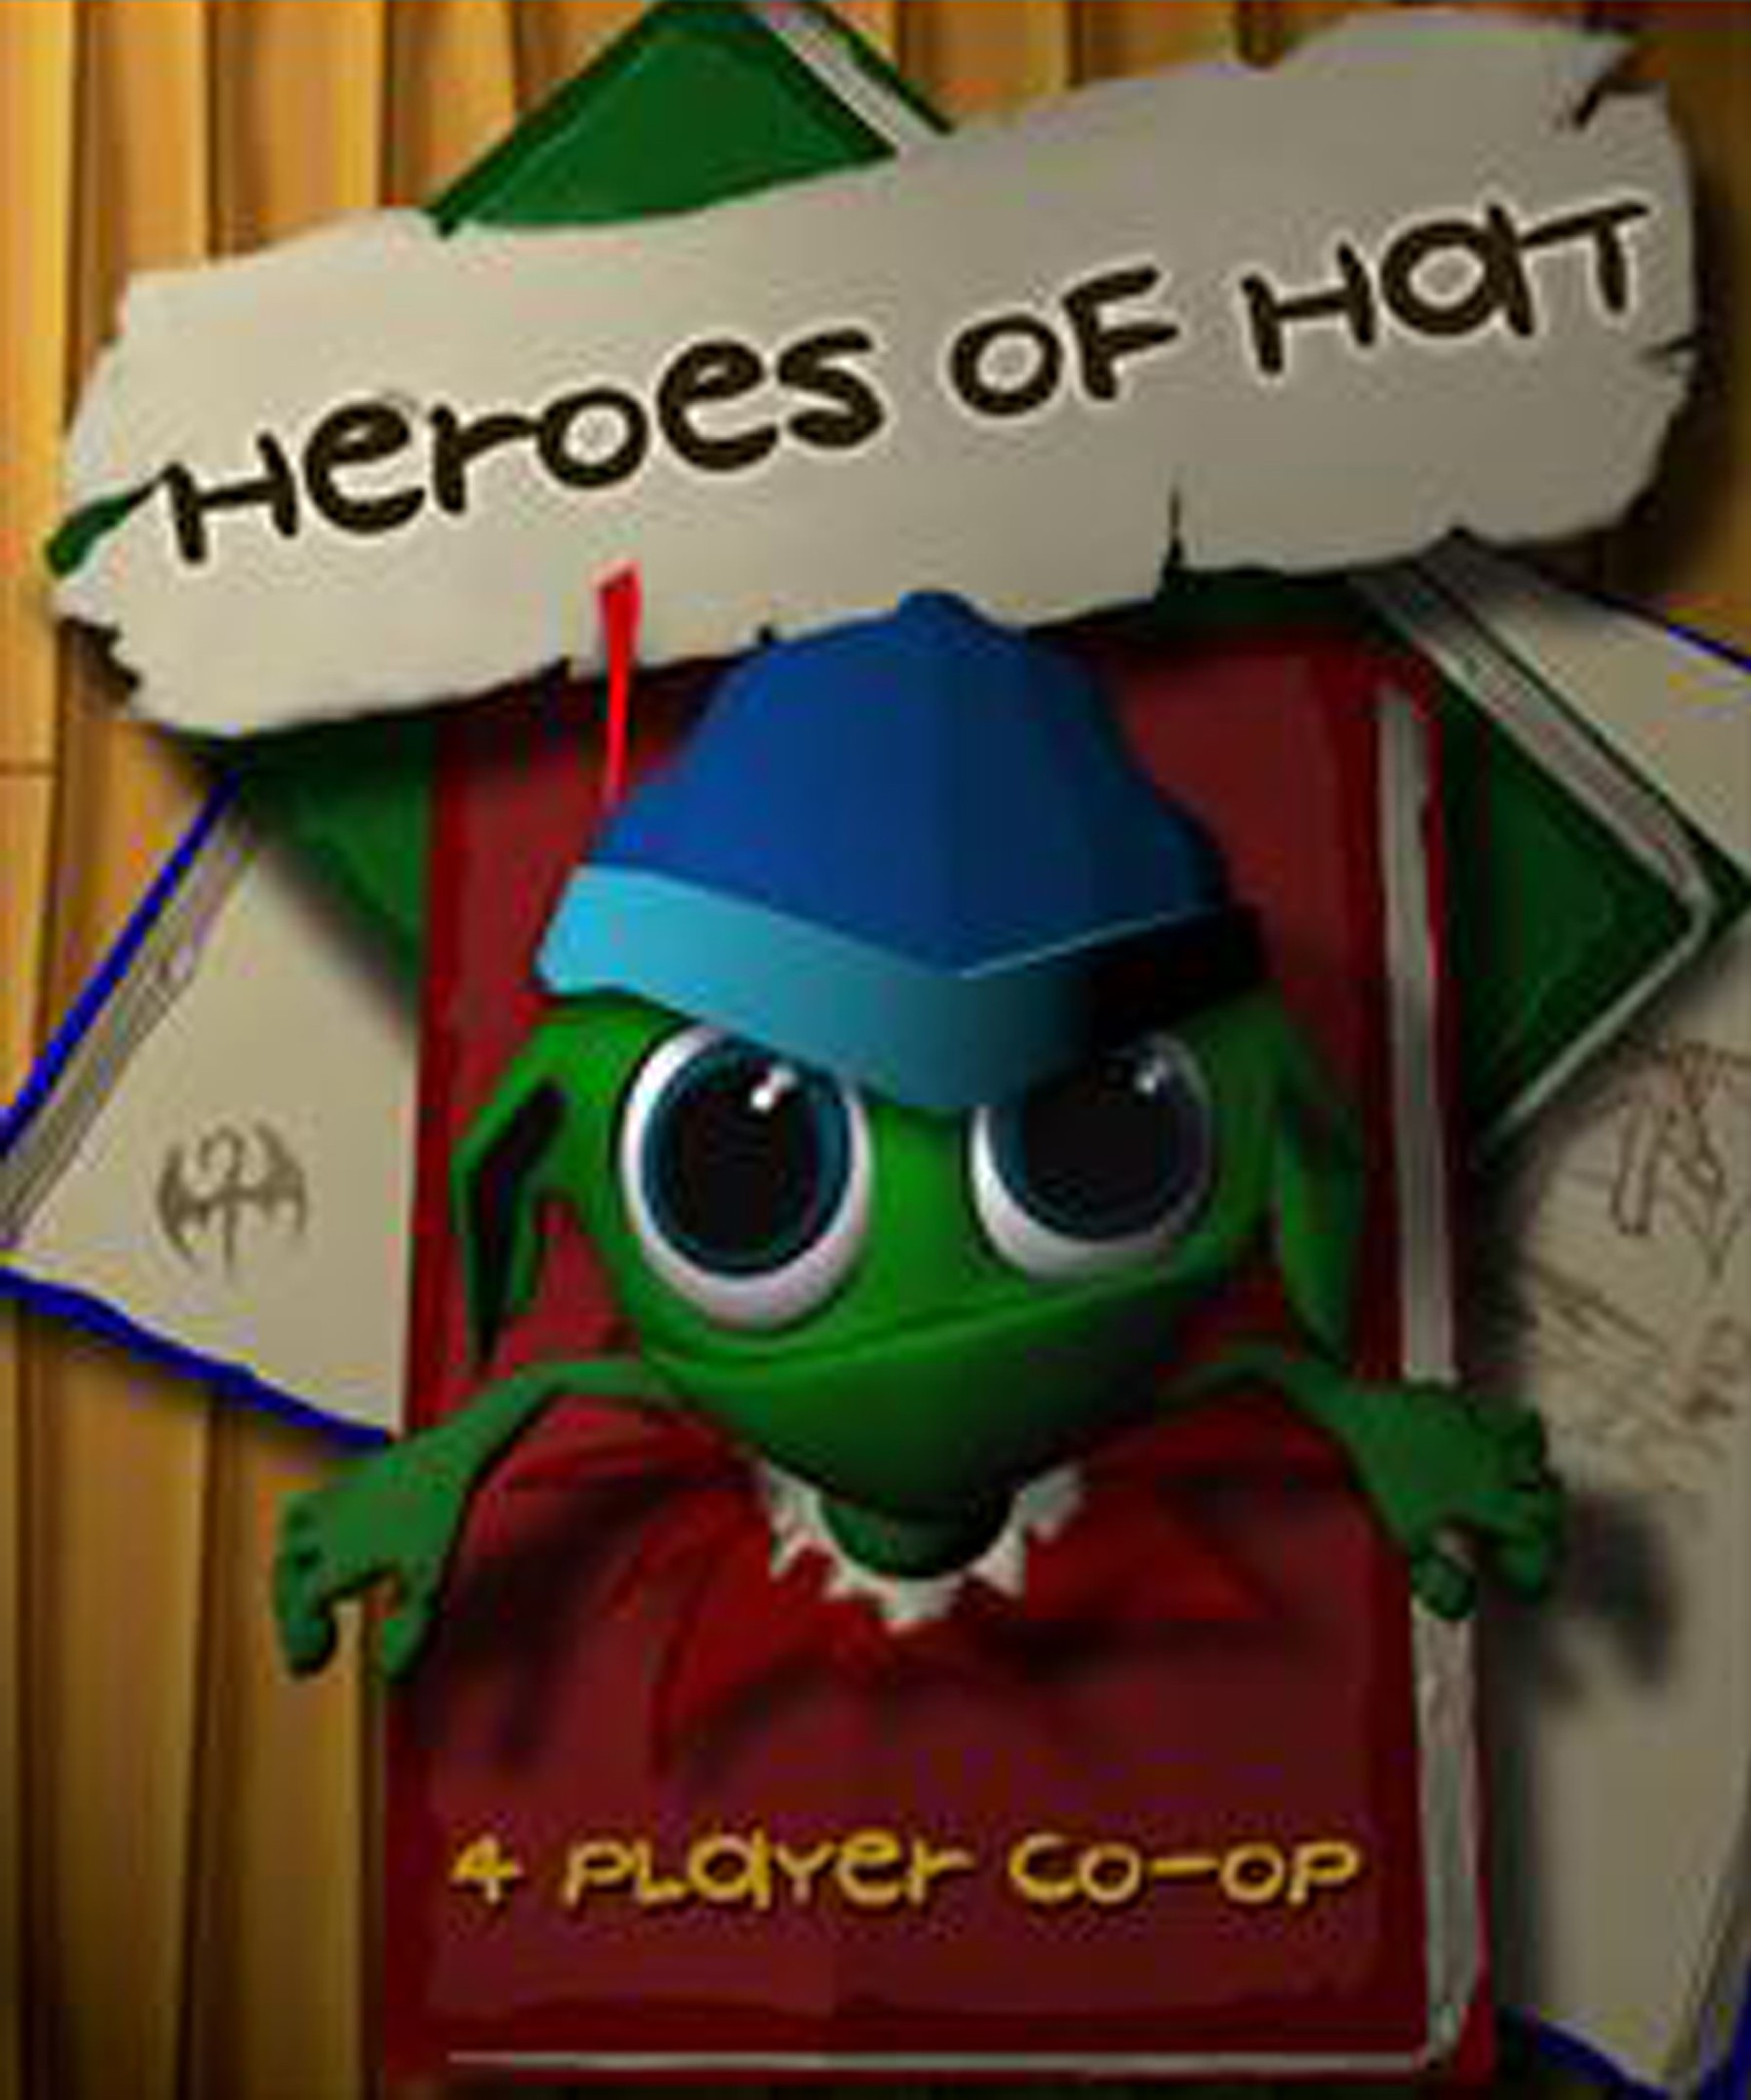 “Heroes of Hat,” the first game produced by students in the EAE program at the University of Utah.